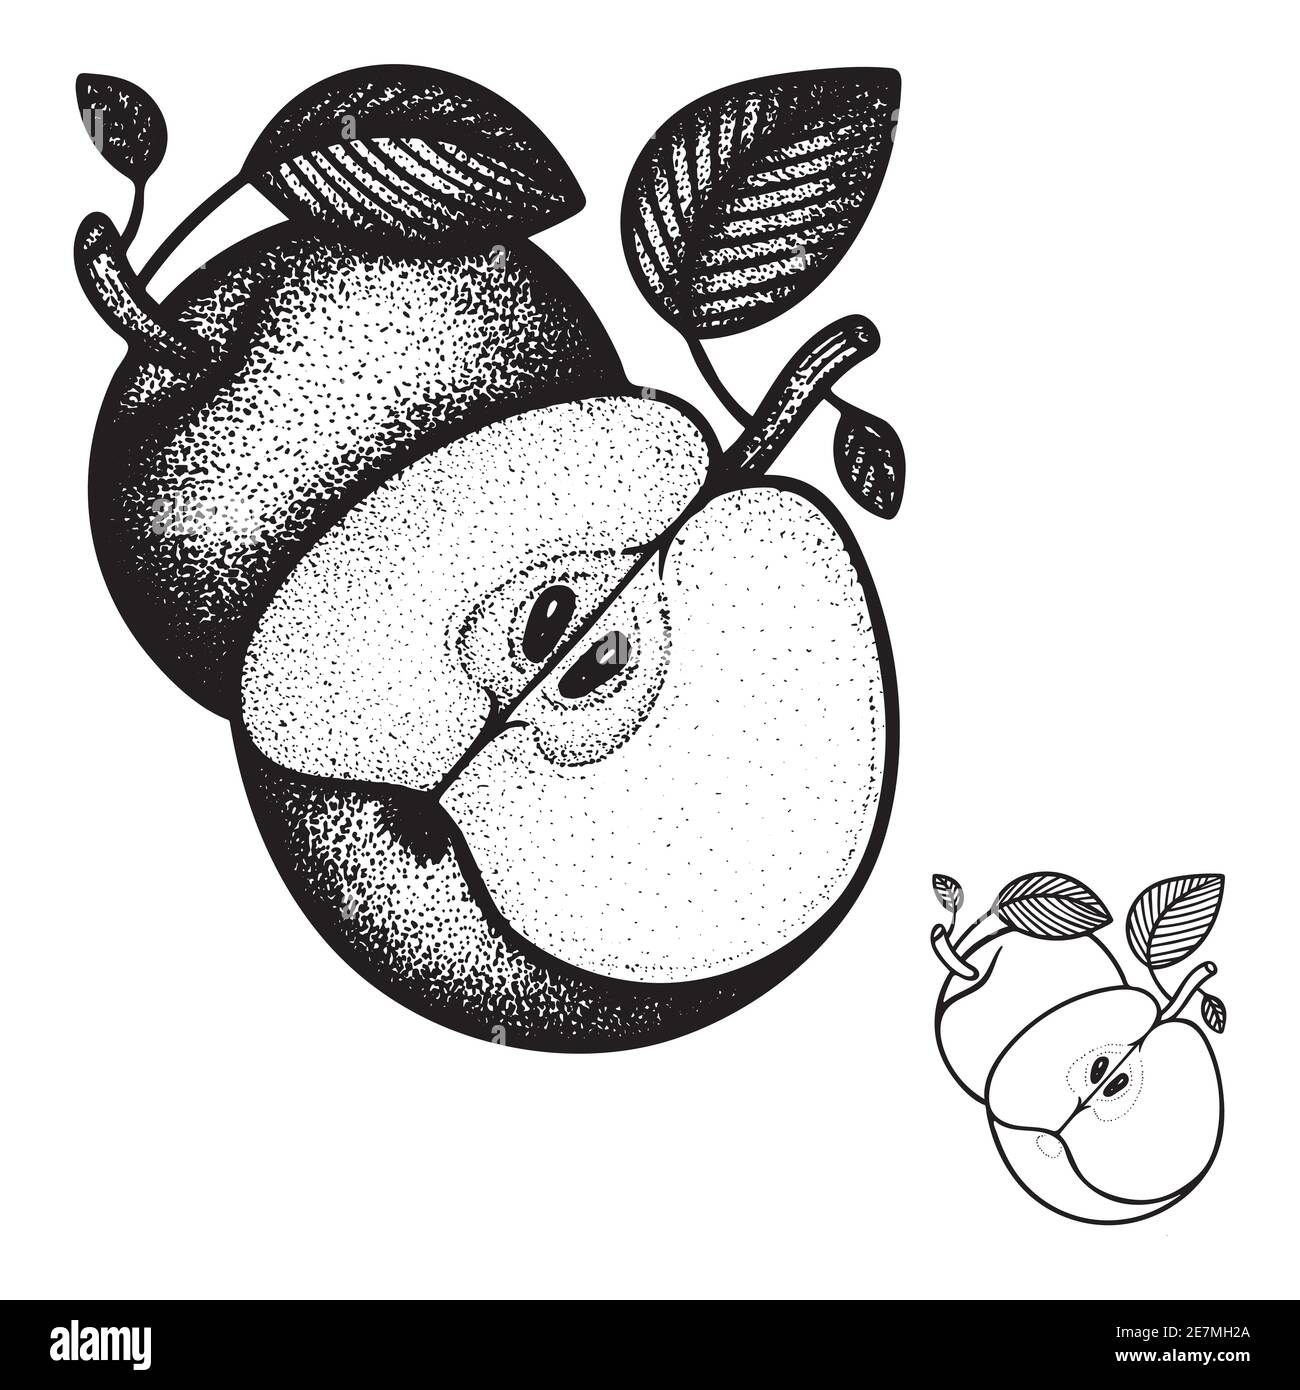 Apples. Engraving style apples vector illustration. Apples with leaves hand drawn graphic. Part of set. Stock Vector